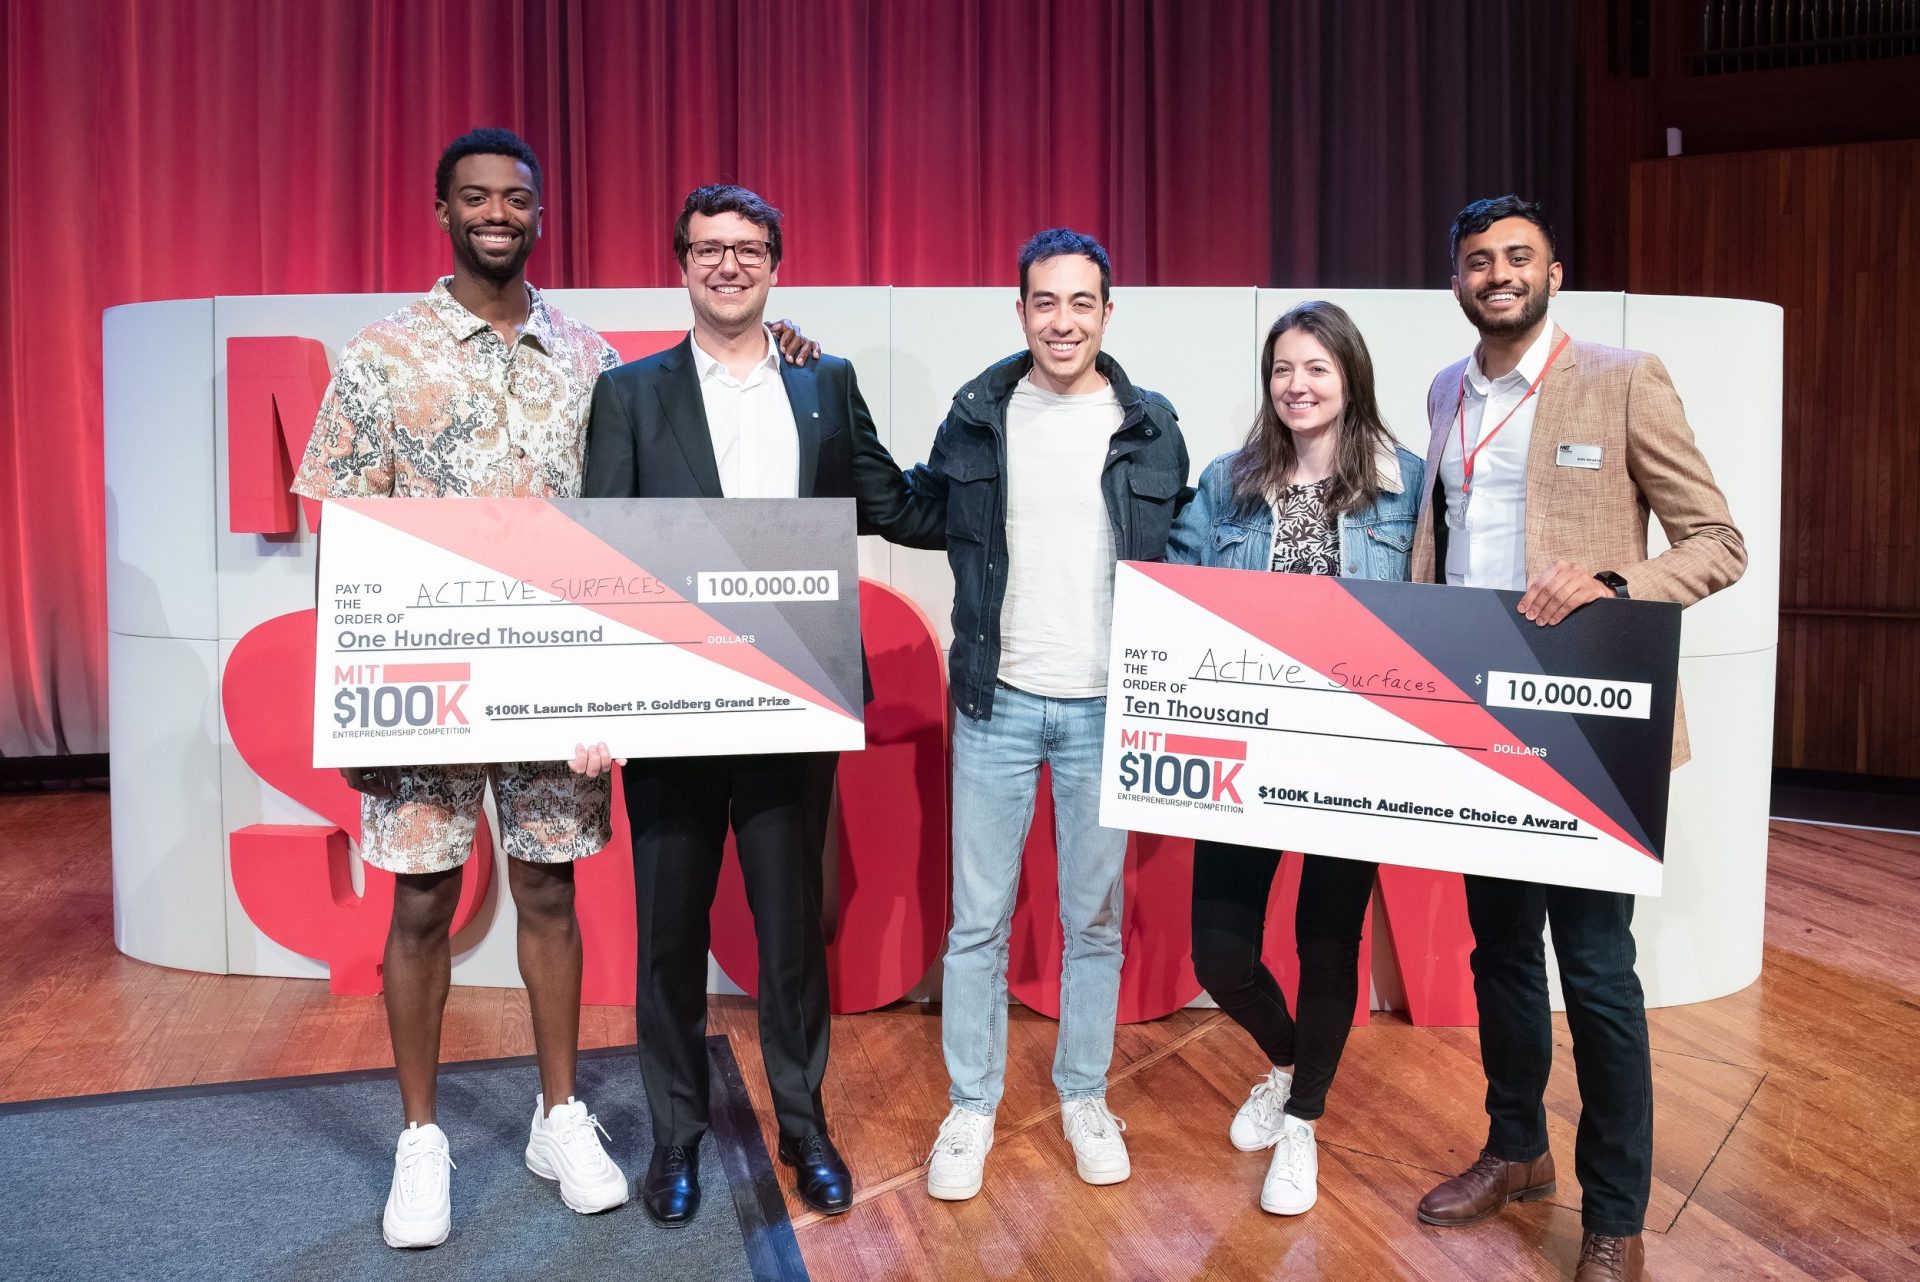 3 Questions: What’s it like winning the MIT $100K Entrepreneurship Competition?